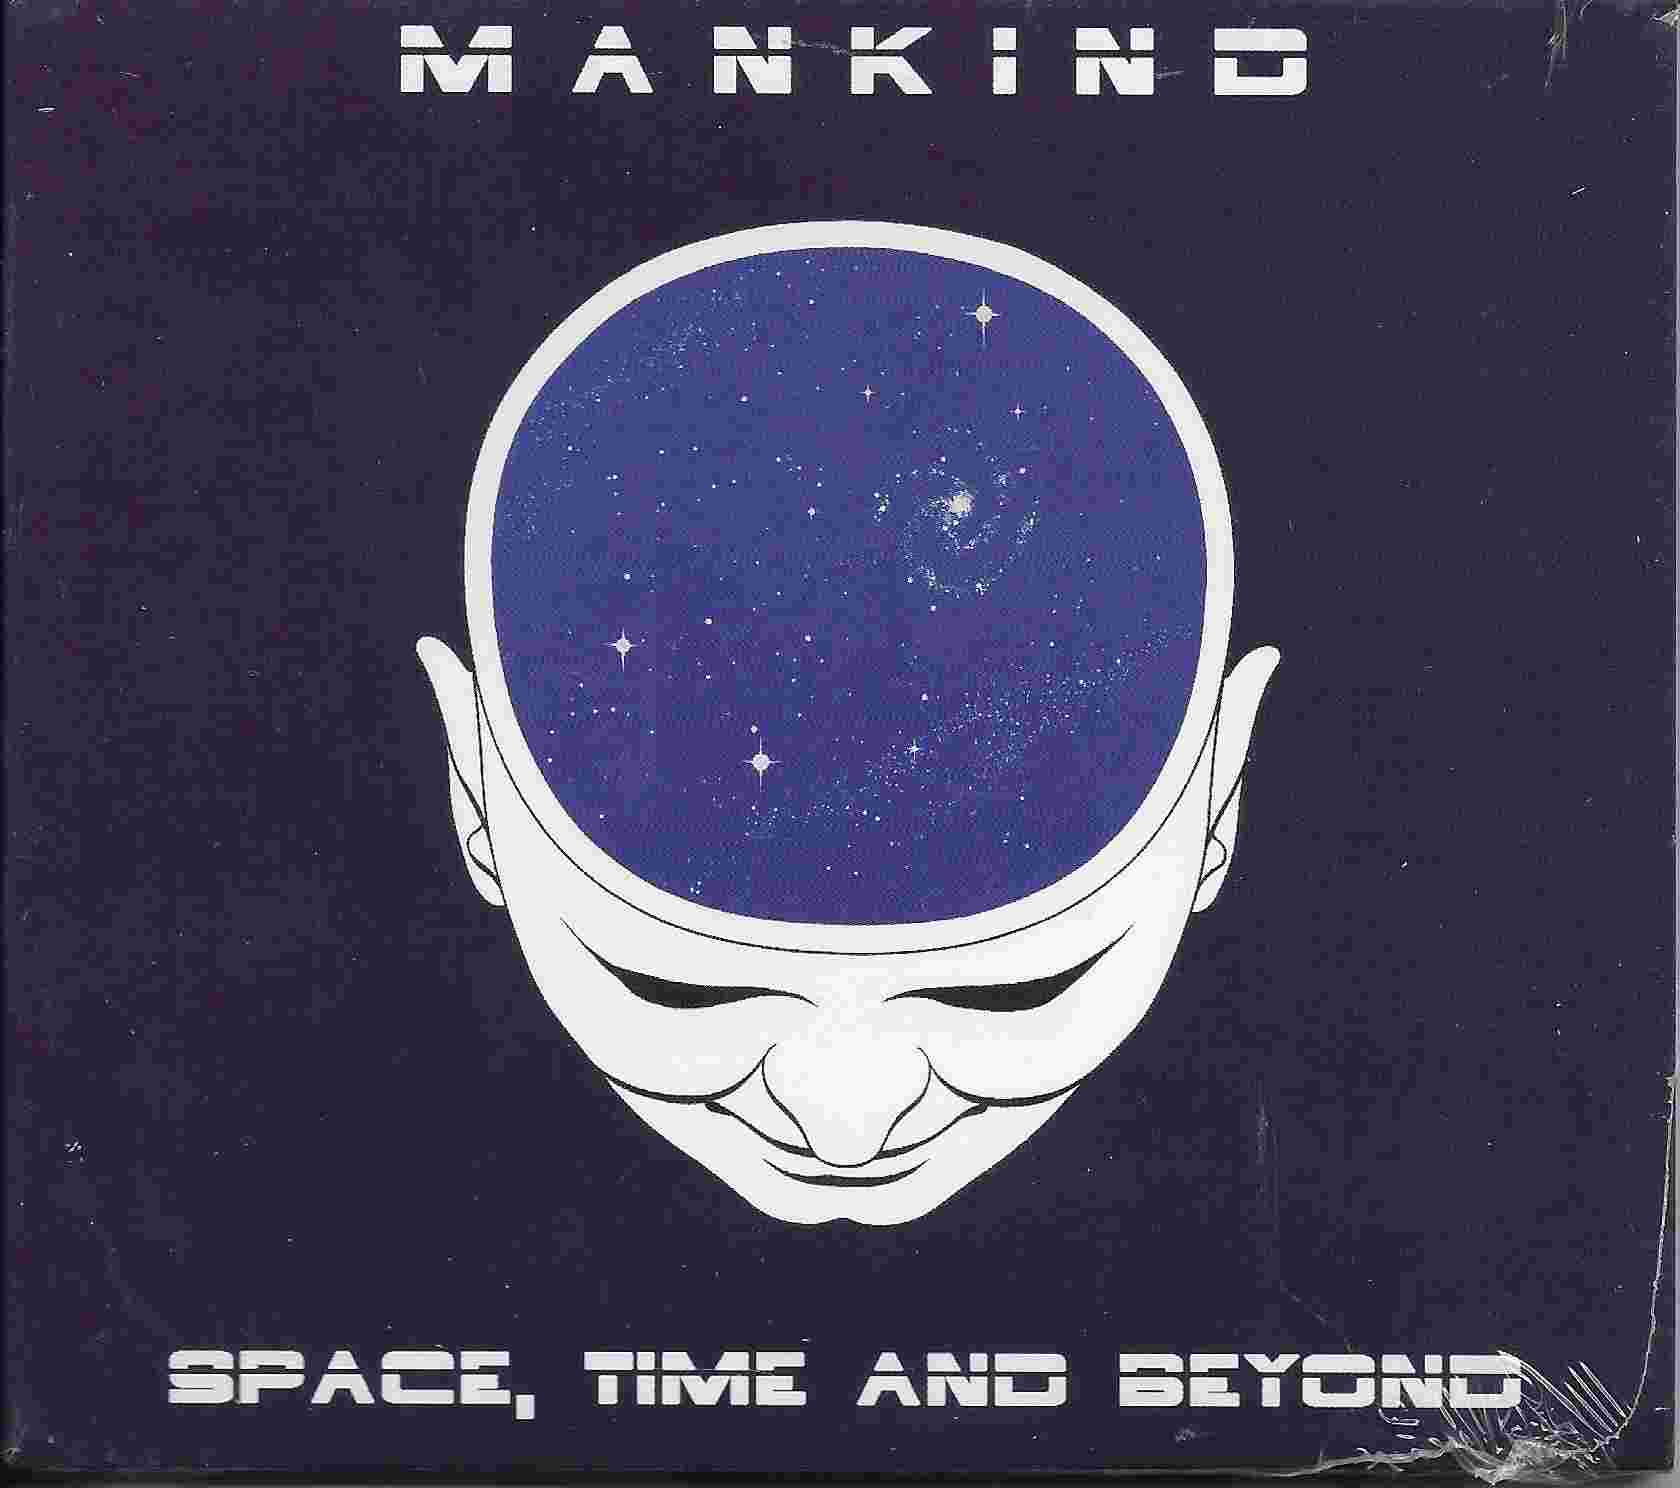 Picture of MONCD 020758 Space, time and beyond by artist Mankind from the BBC records and Tapes library